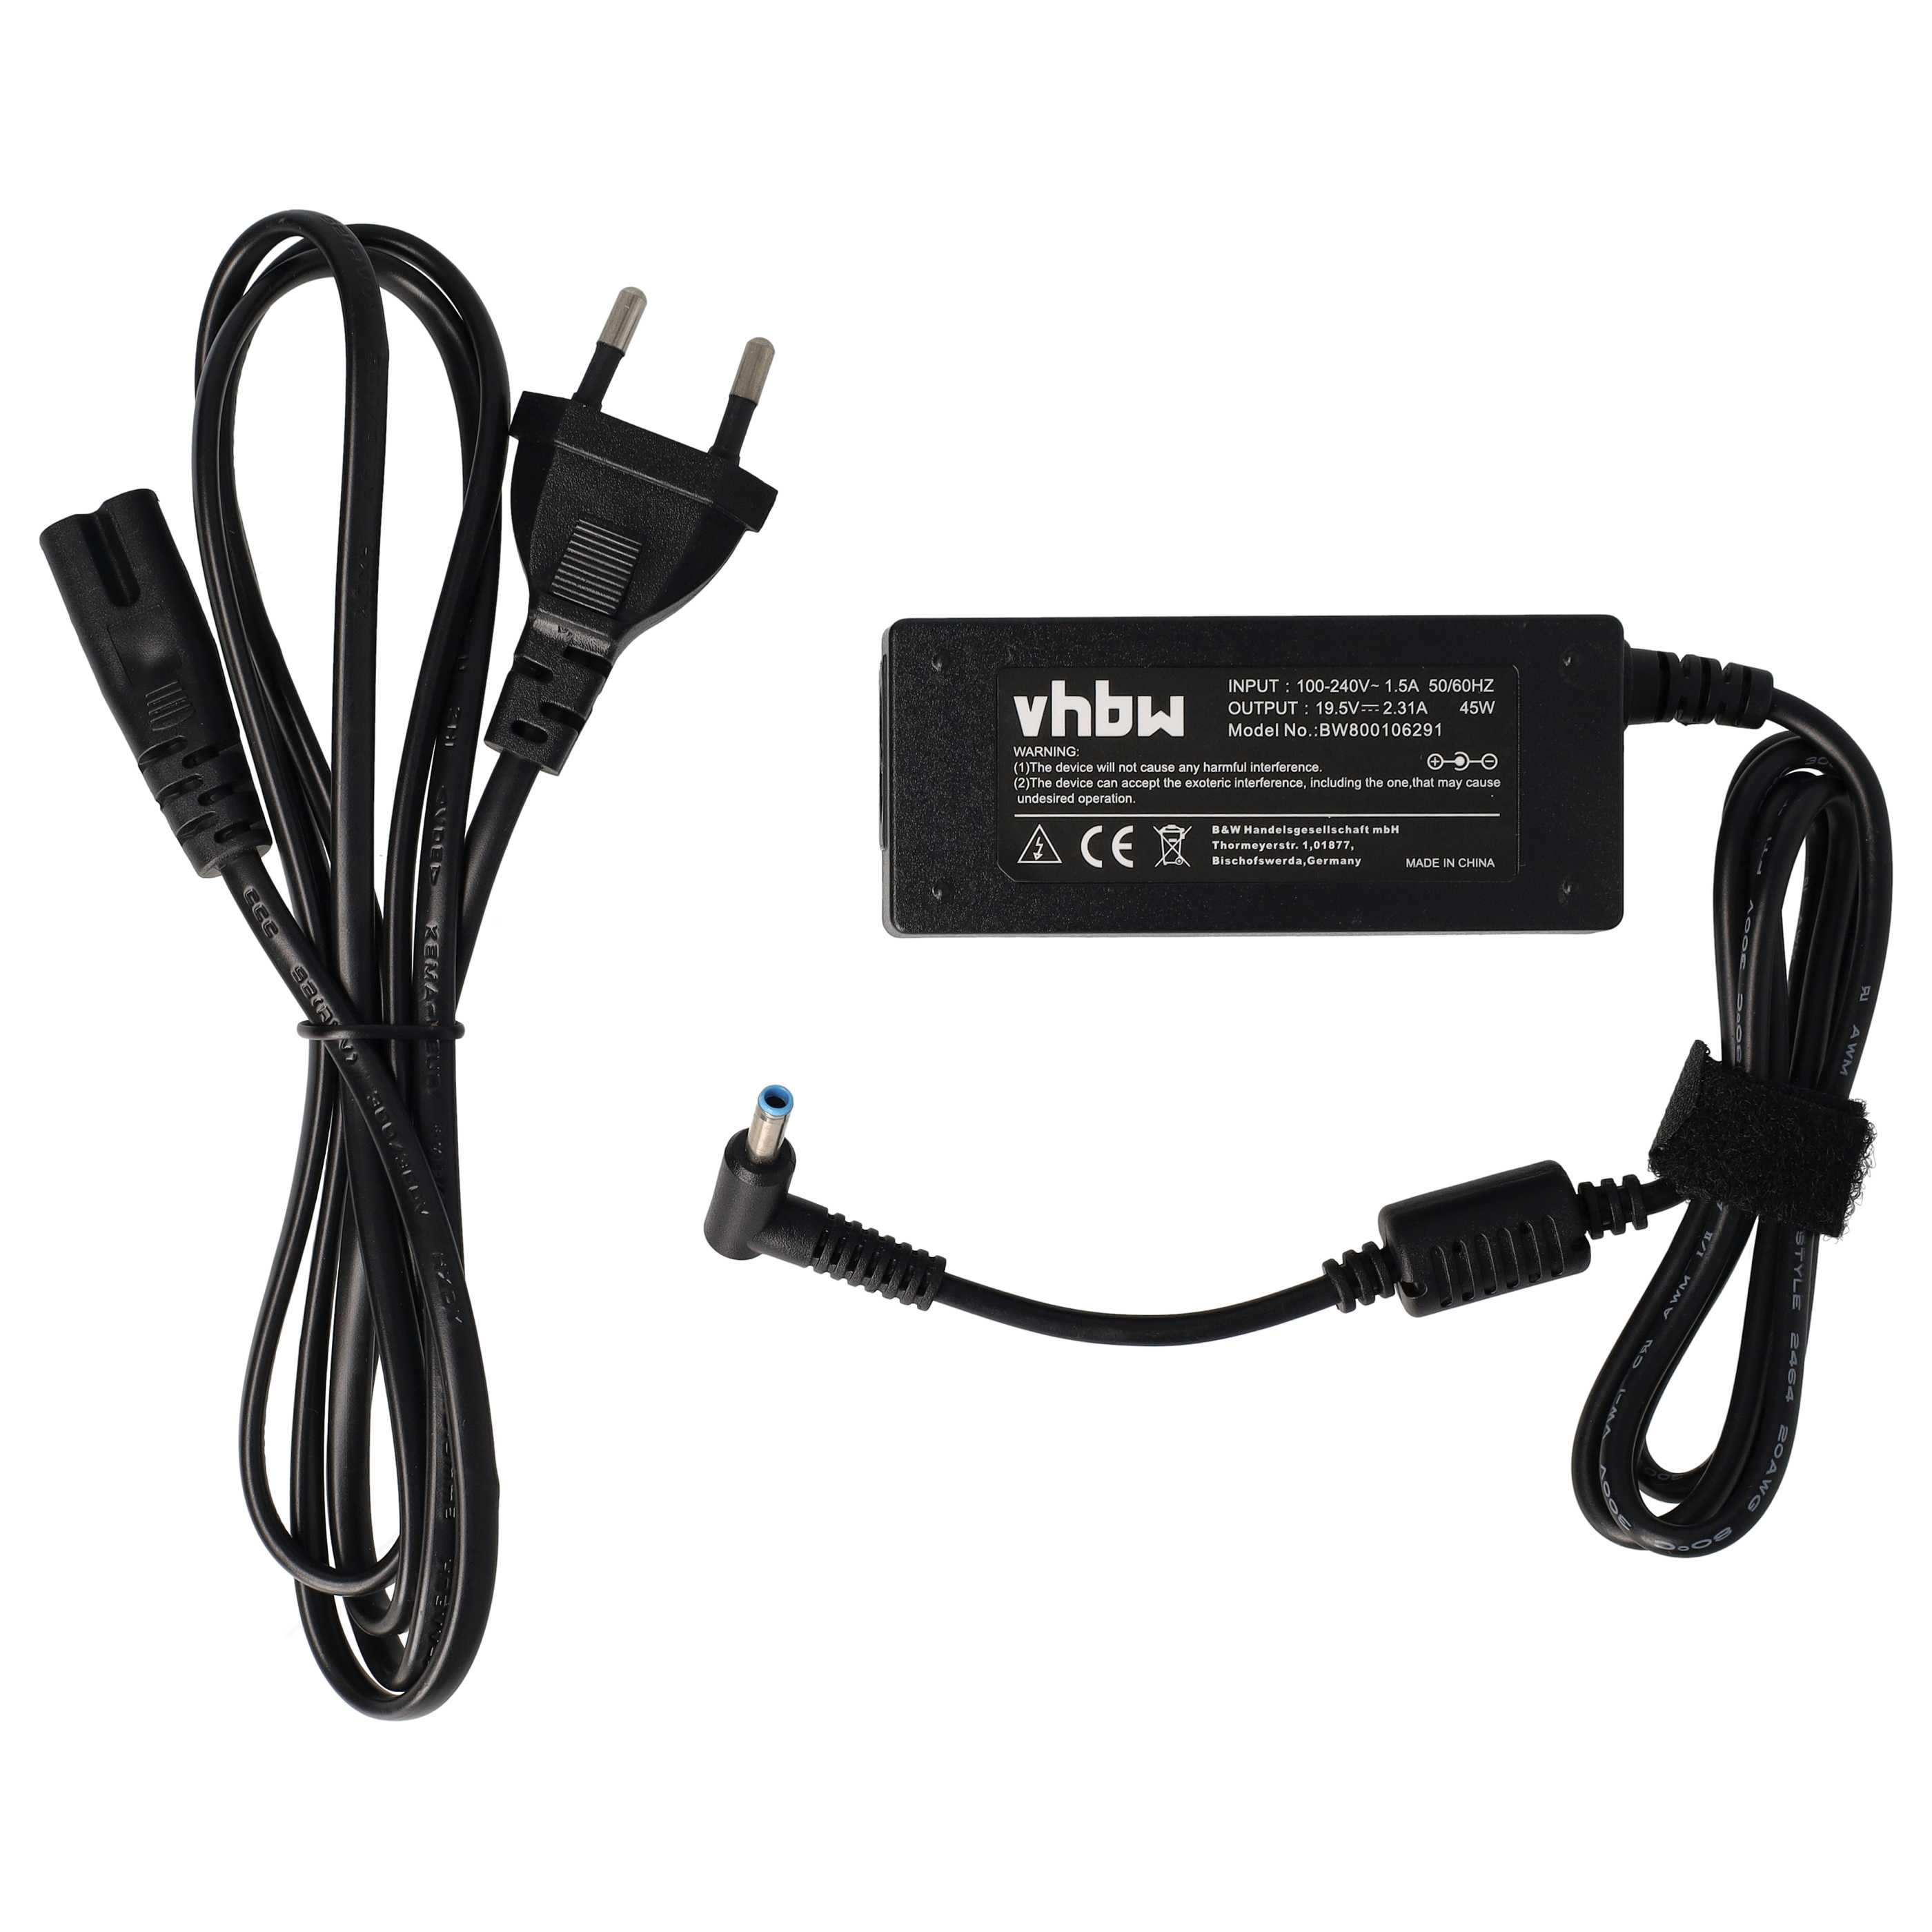 Mains Power Adapter replaces Dell 0CDF57, 04H6NV, 00285K, 03RG0T PA-1450-66D1 for DellNotebook etc., 45 W